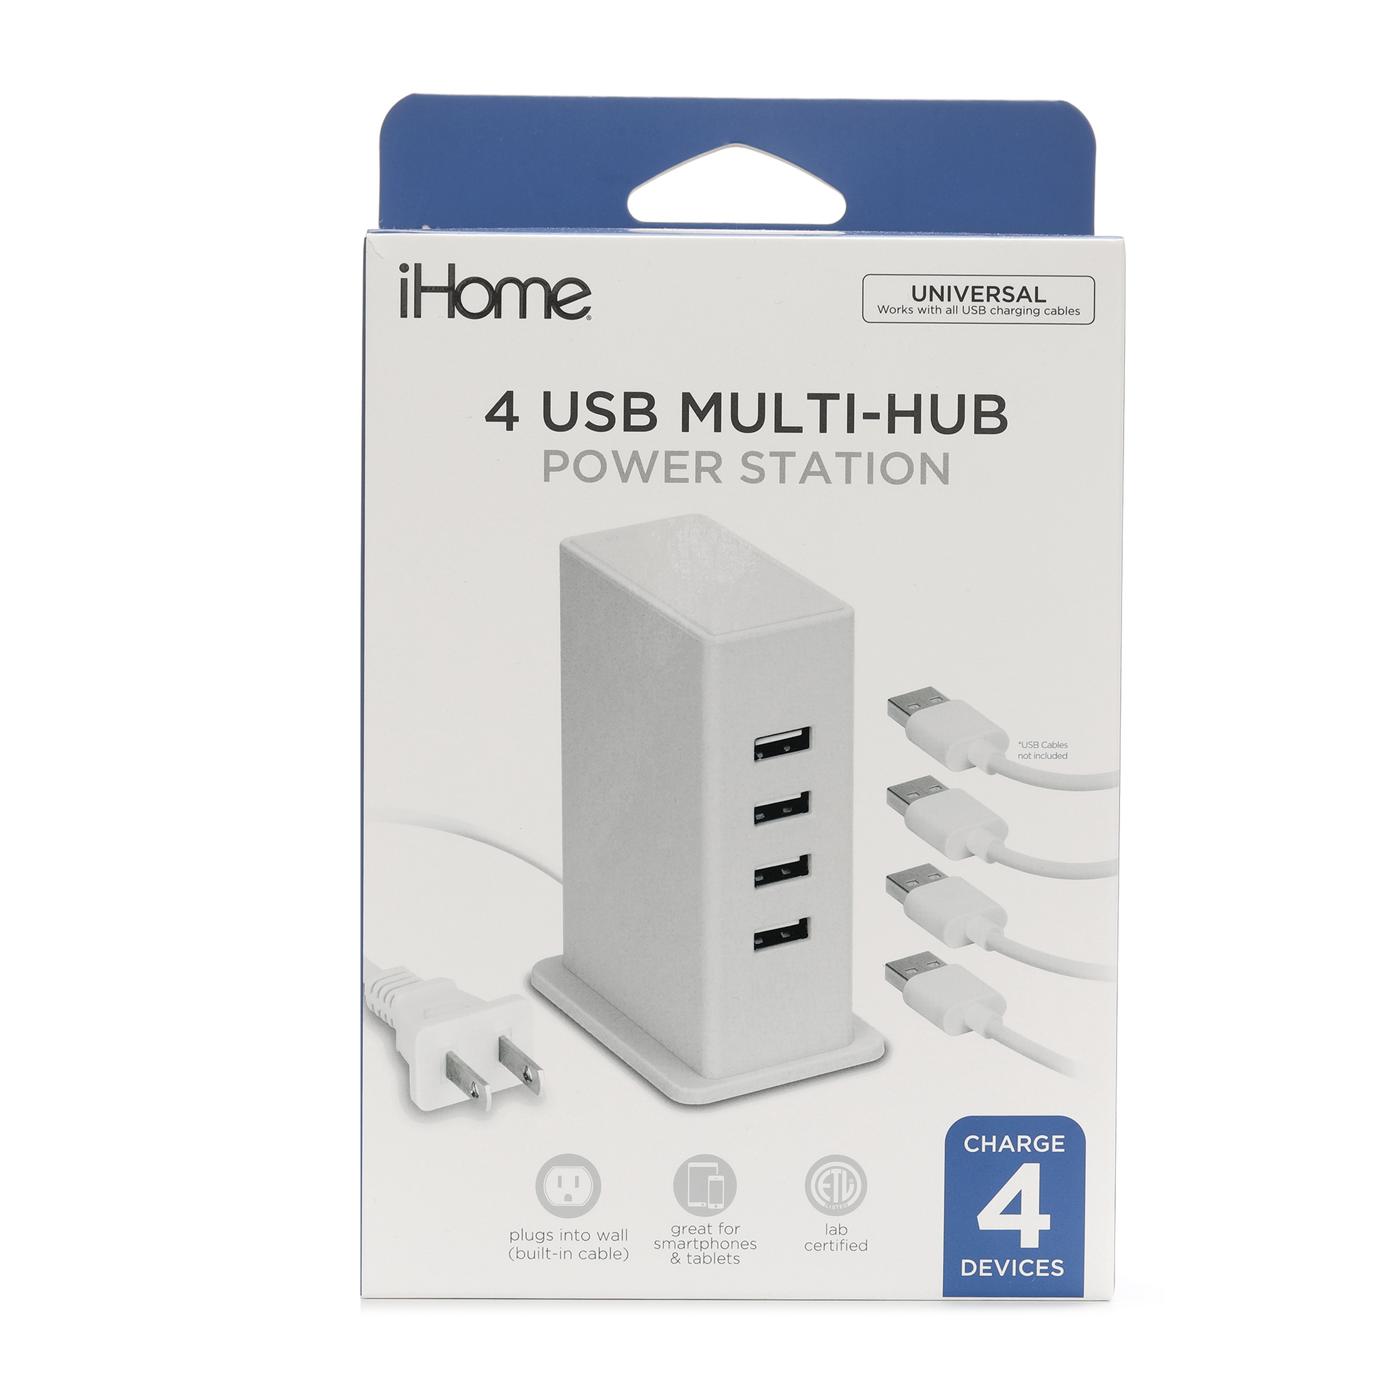 iHome 4-Port USB Power Station - White; image 1 of 2